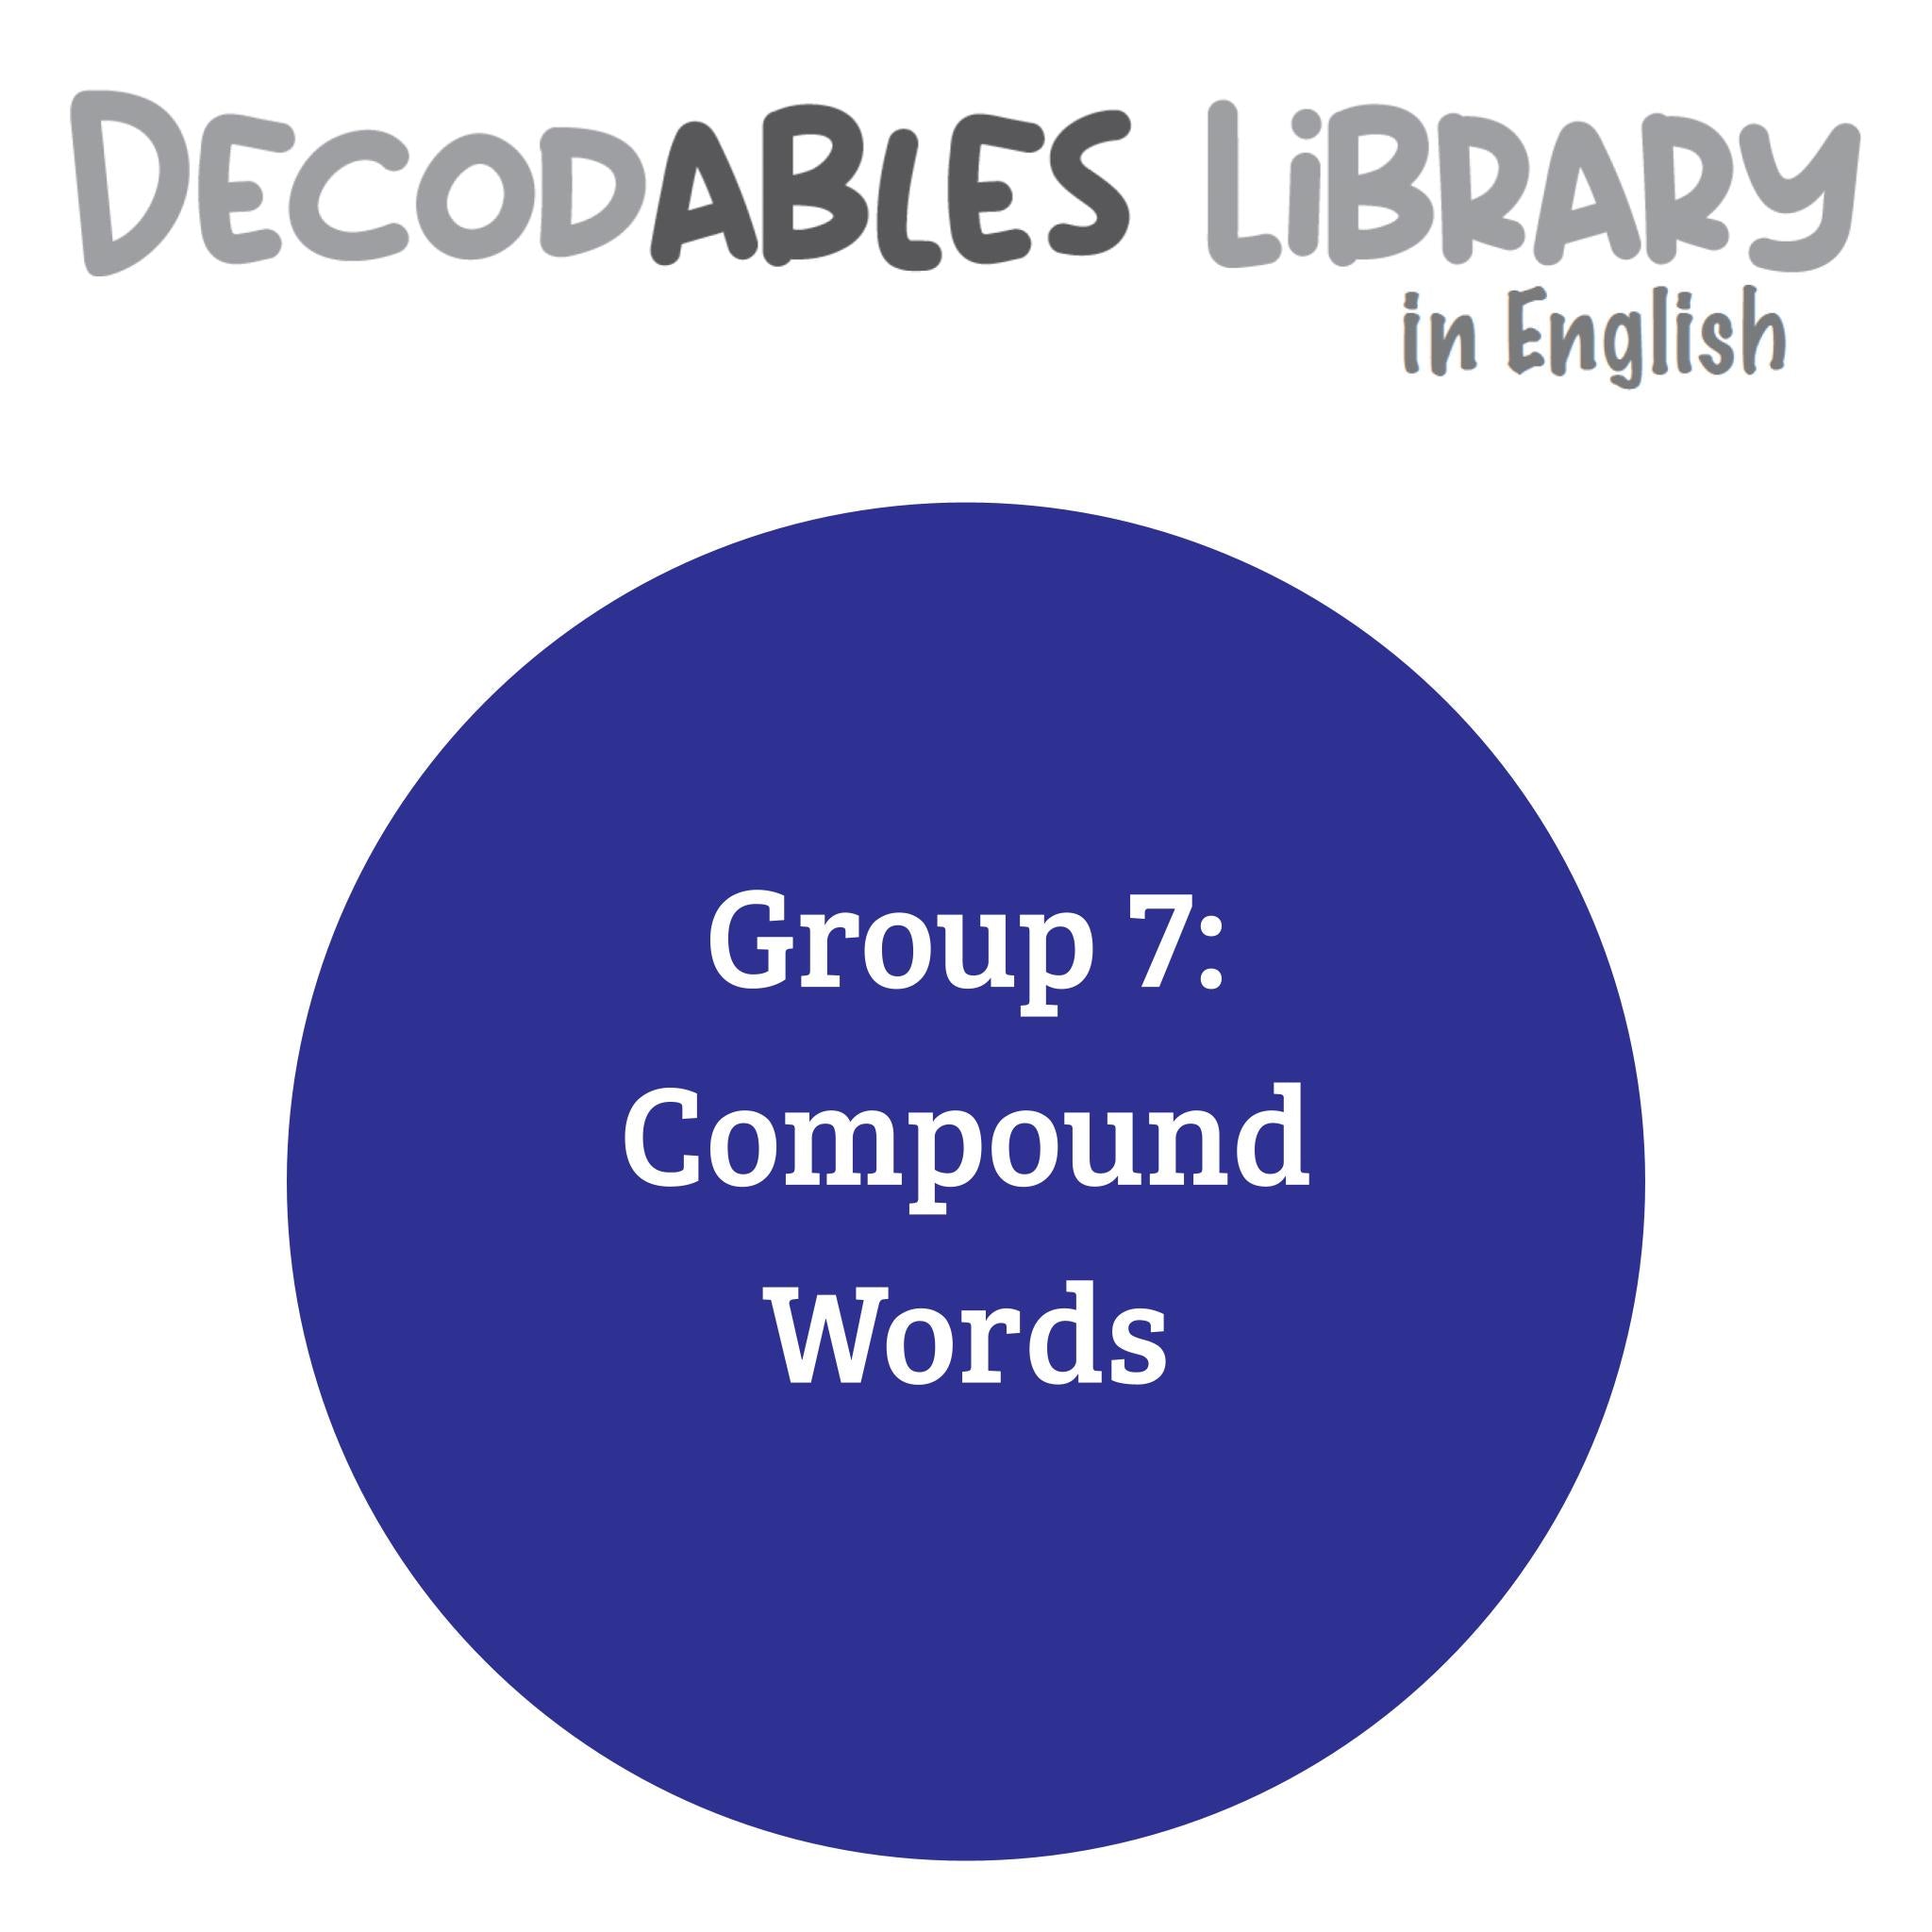 English Decodables Library - Group 7: Compound Words (set of 3 titles)